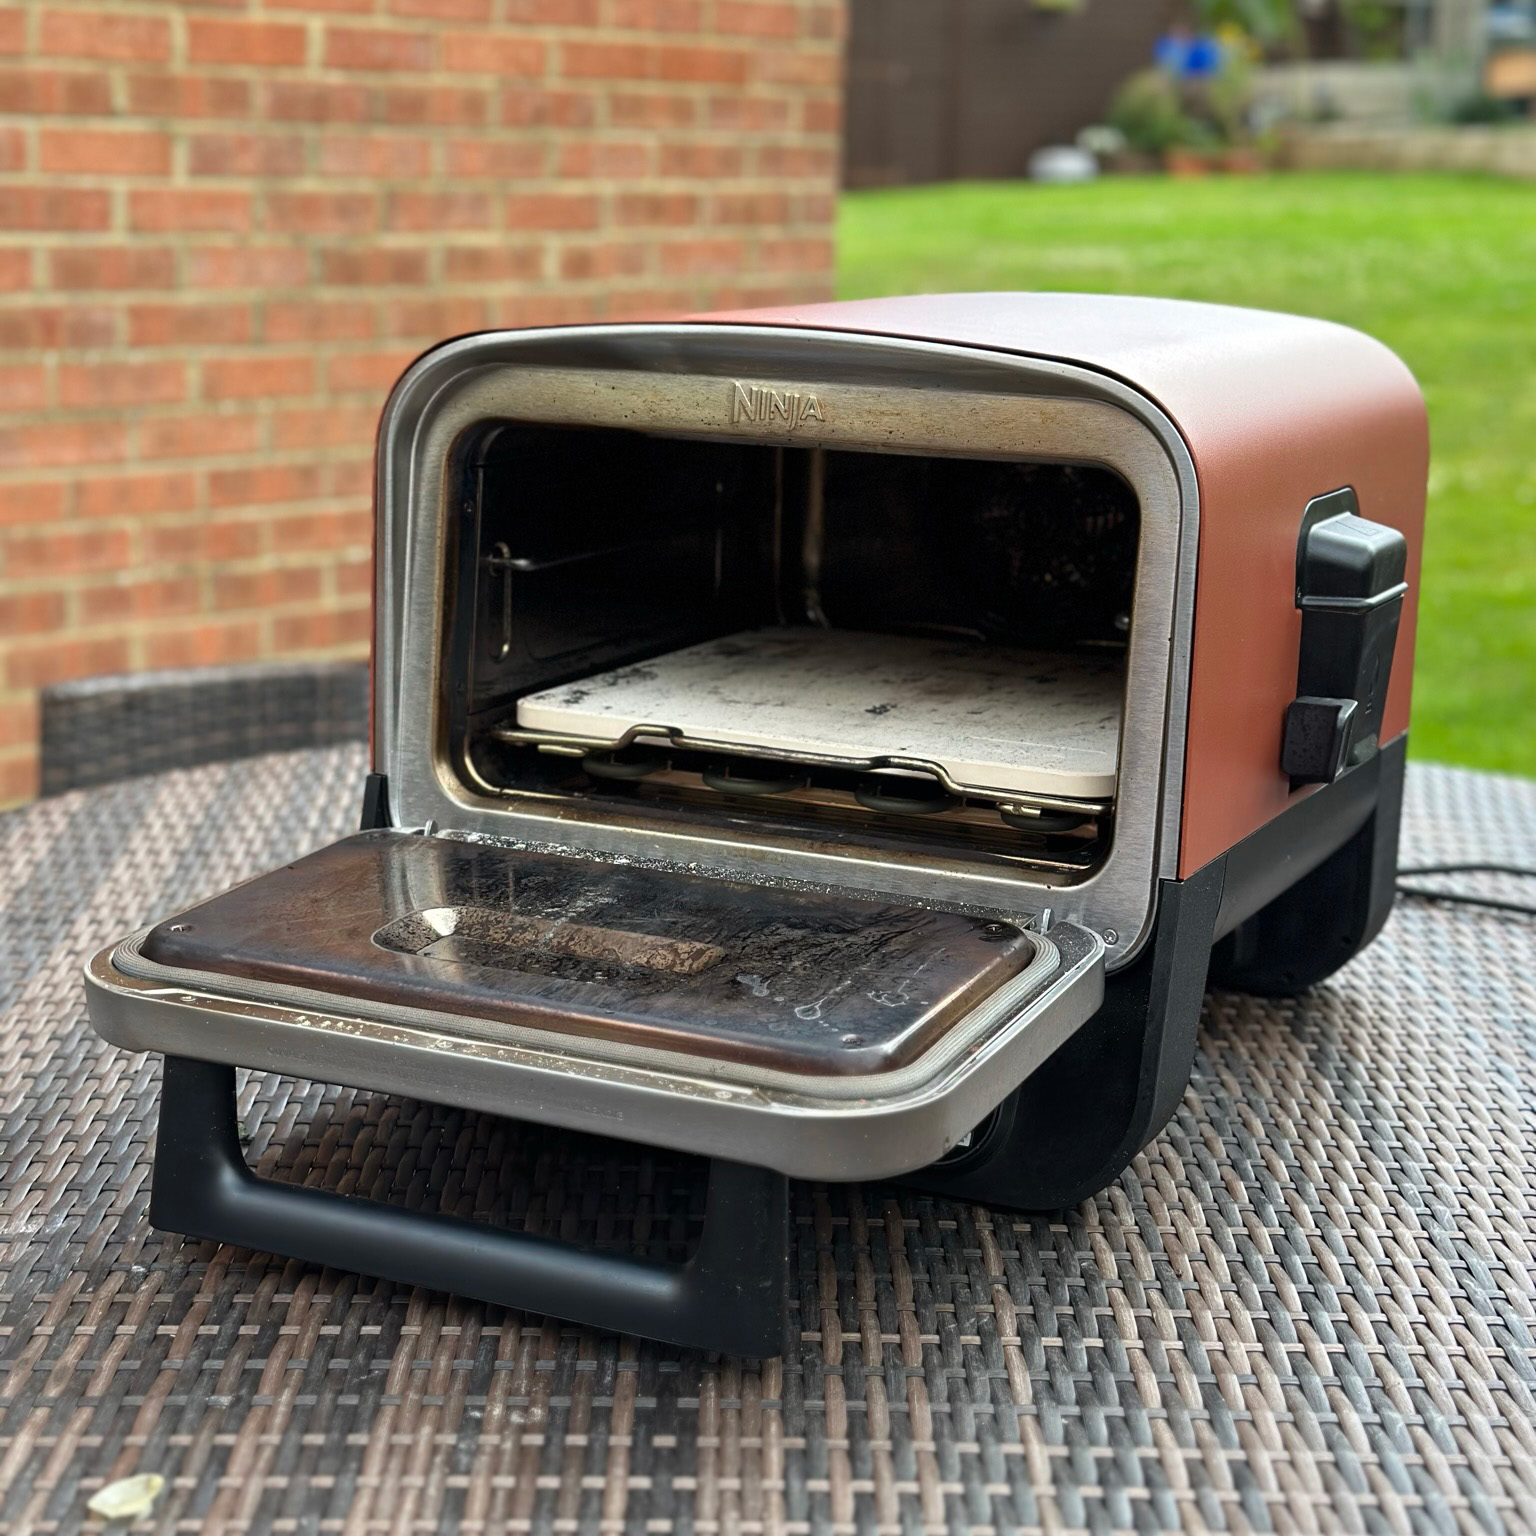 Ninja Woodfire 8-in-1 Outdoor Oven Review: More than just a pizza oven -  Reviewed